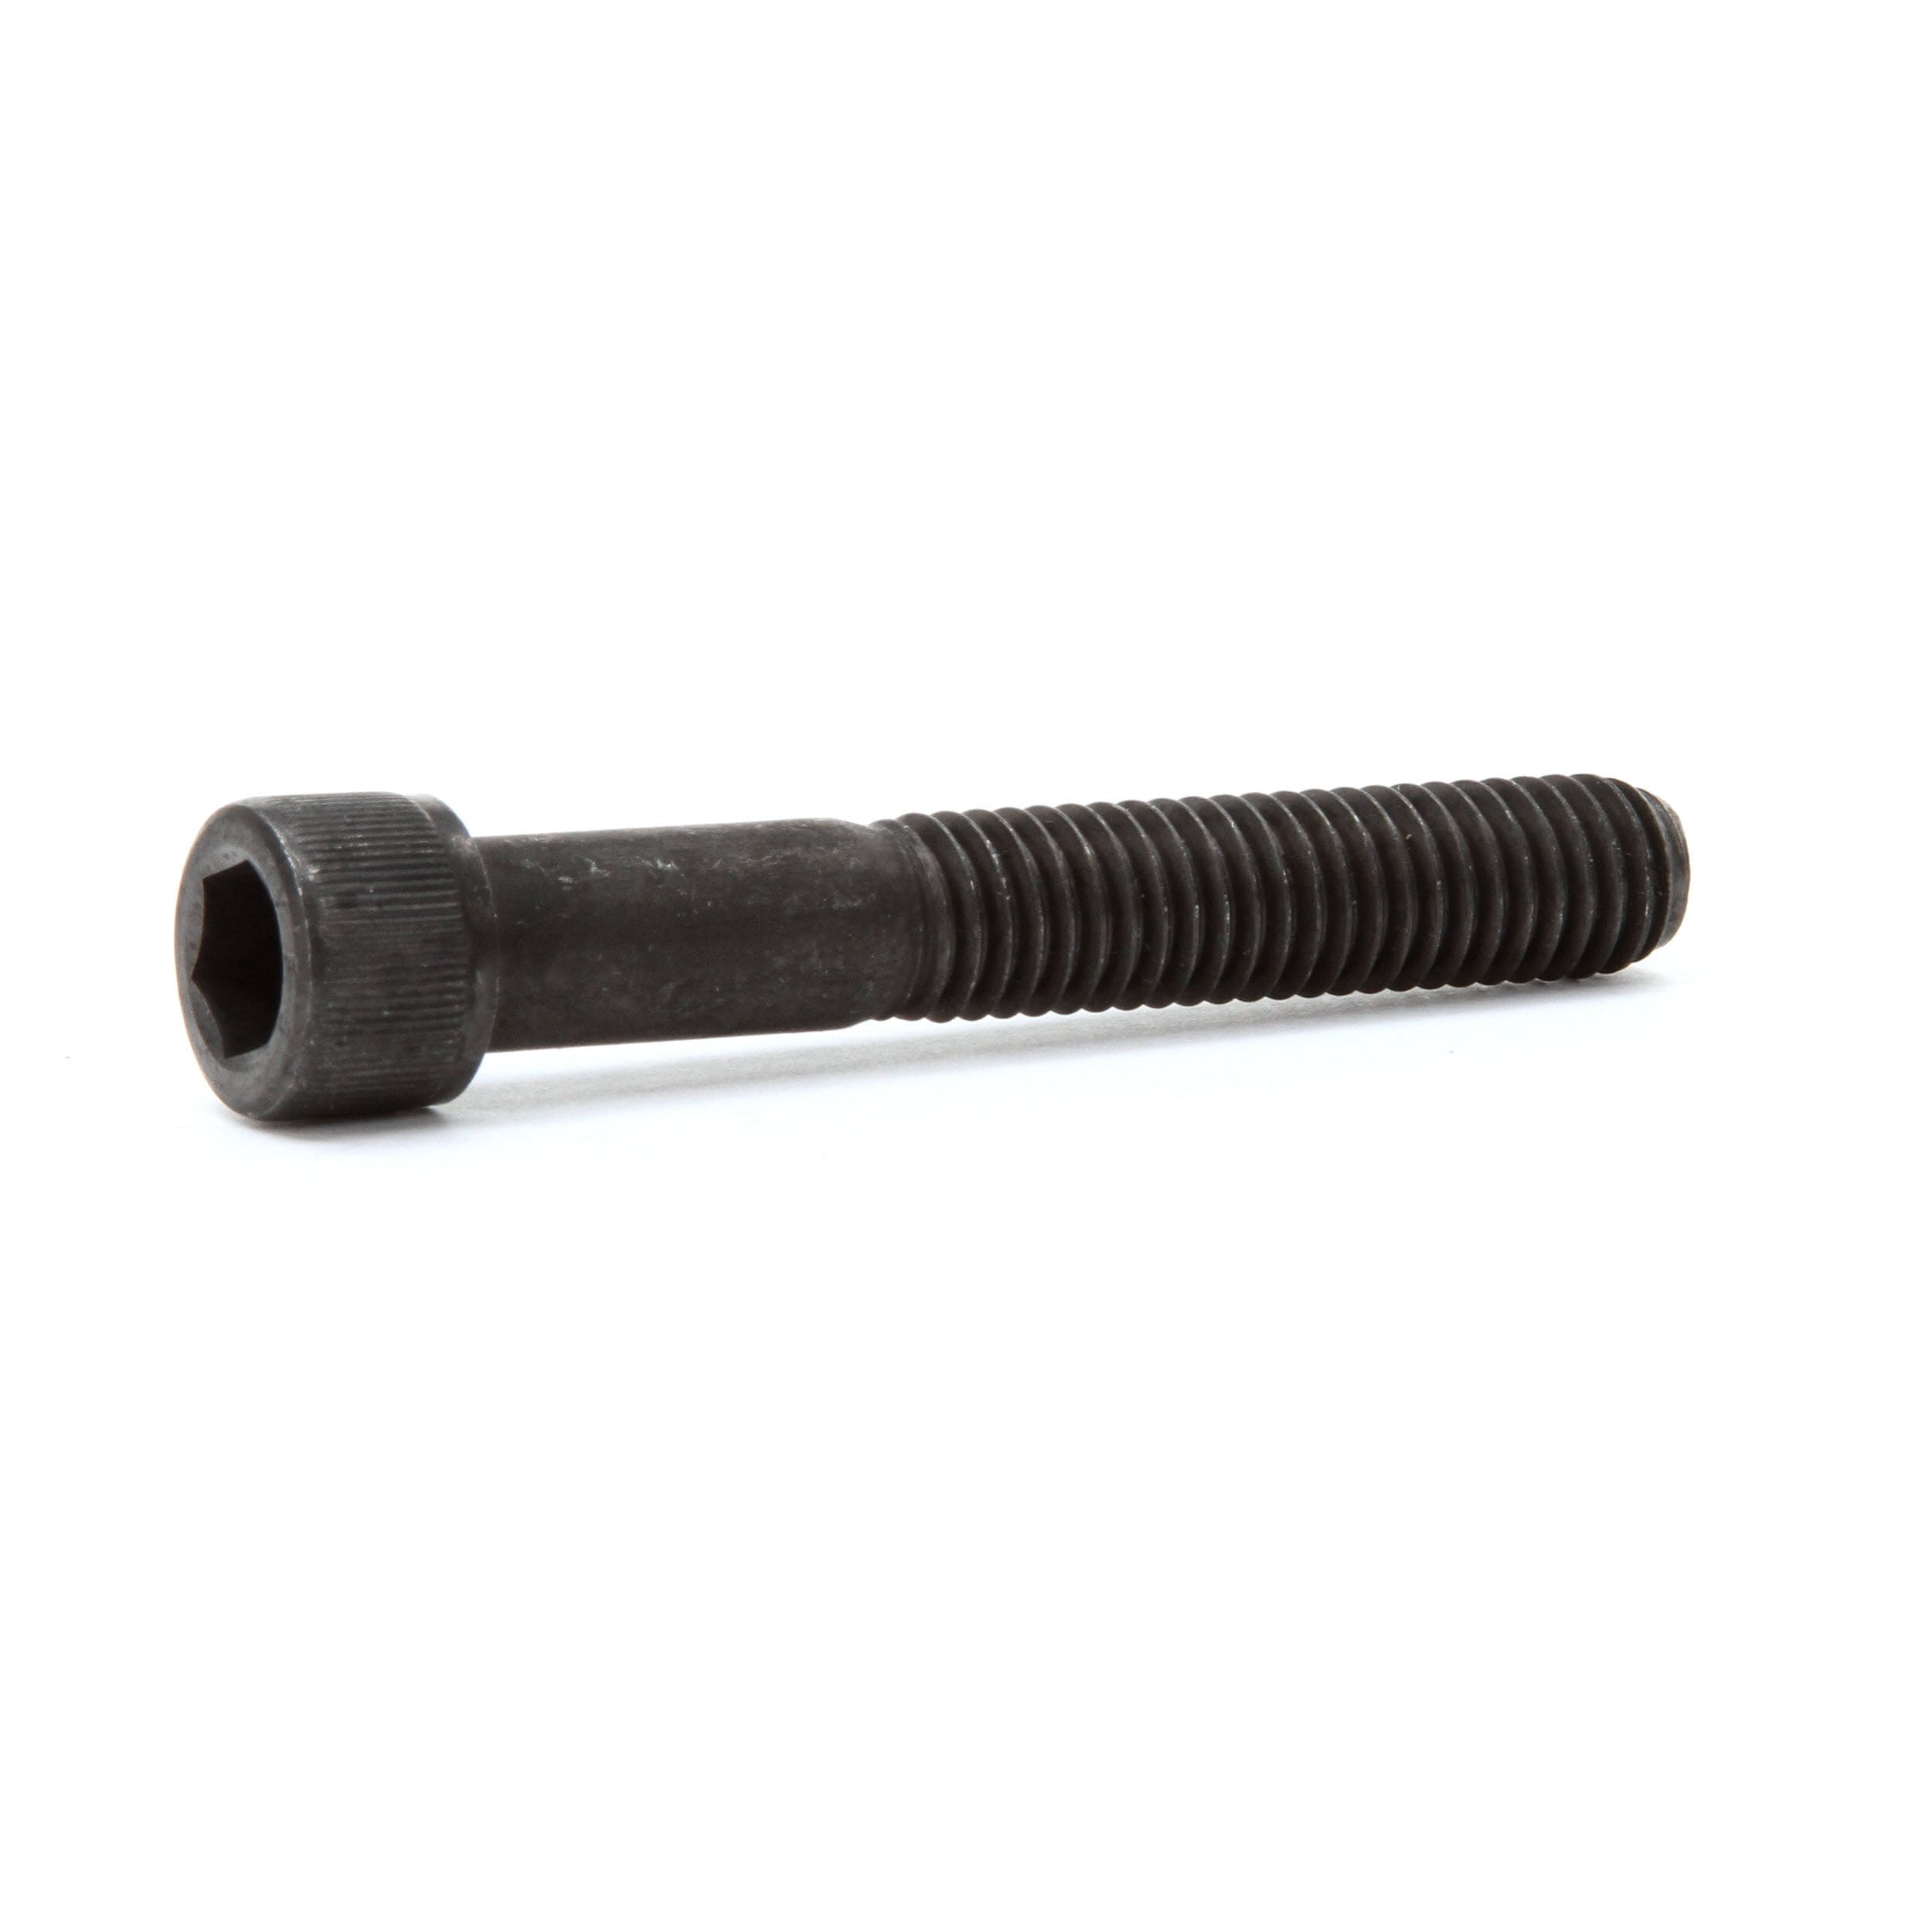 The Hillman Group The Hillman Group 4229 Hex Cap Screw NF Stainless Steel 3/8-24 X 2 In. 7-Pack 